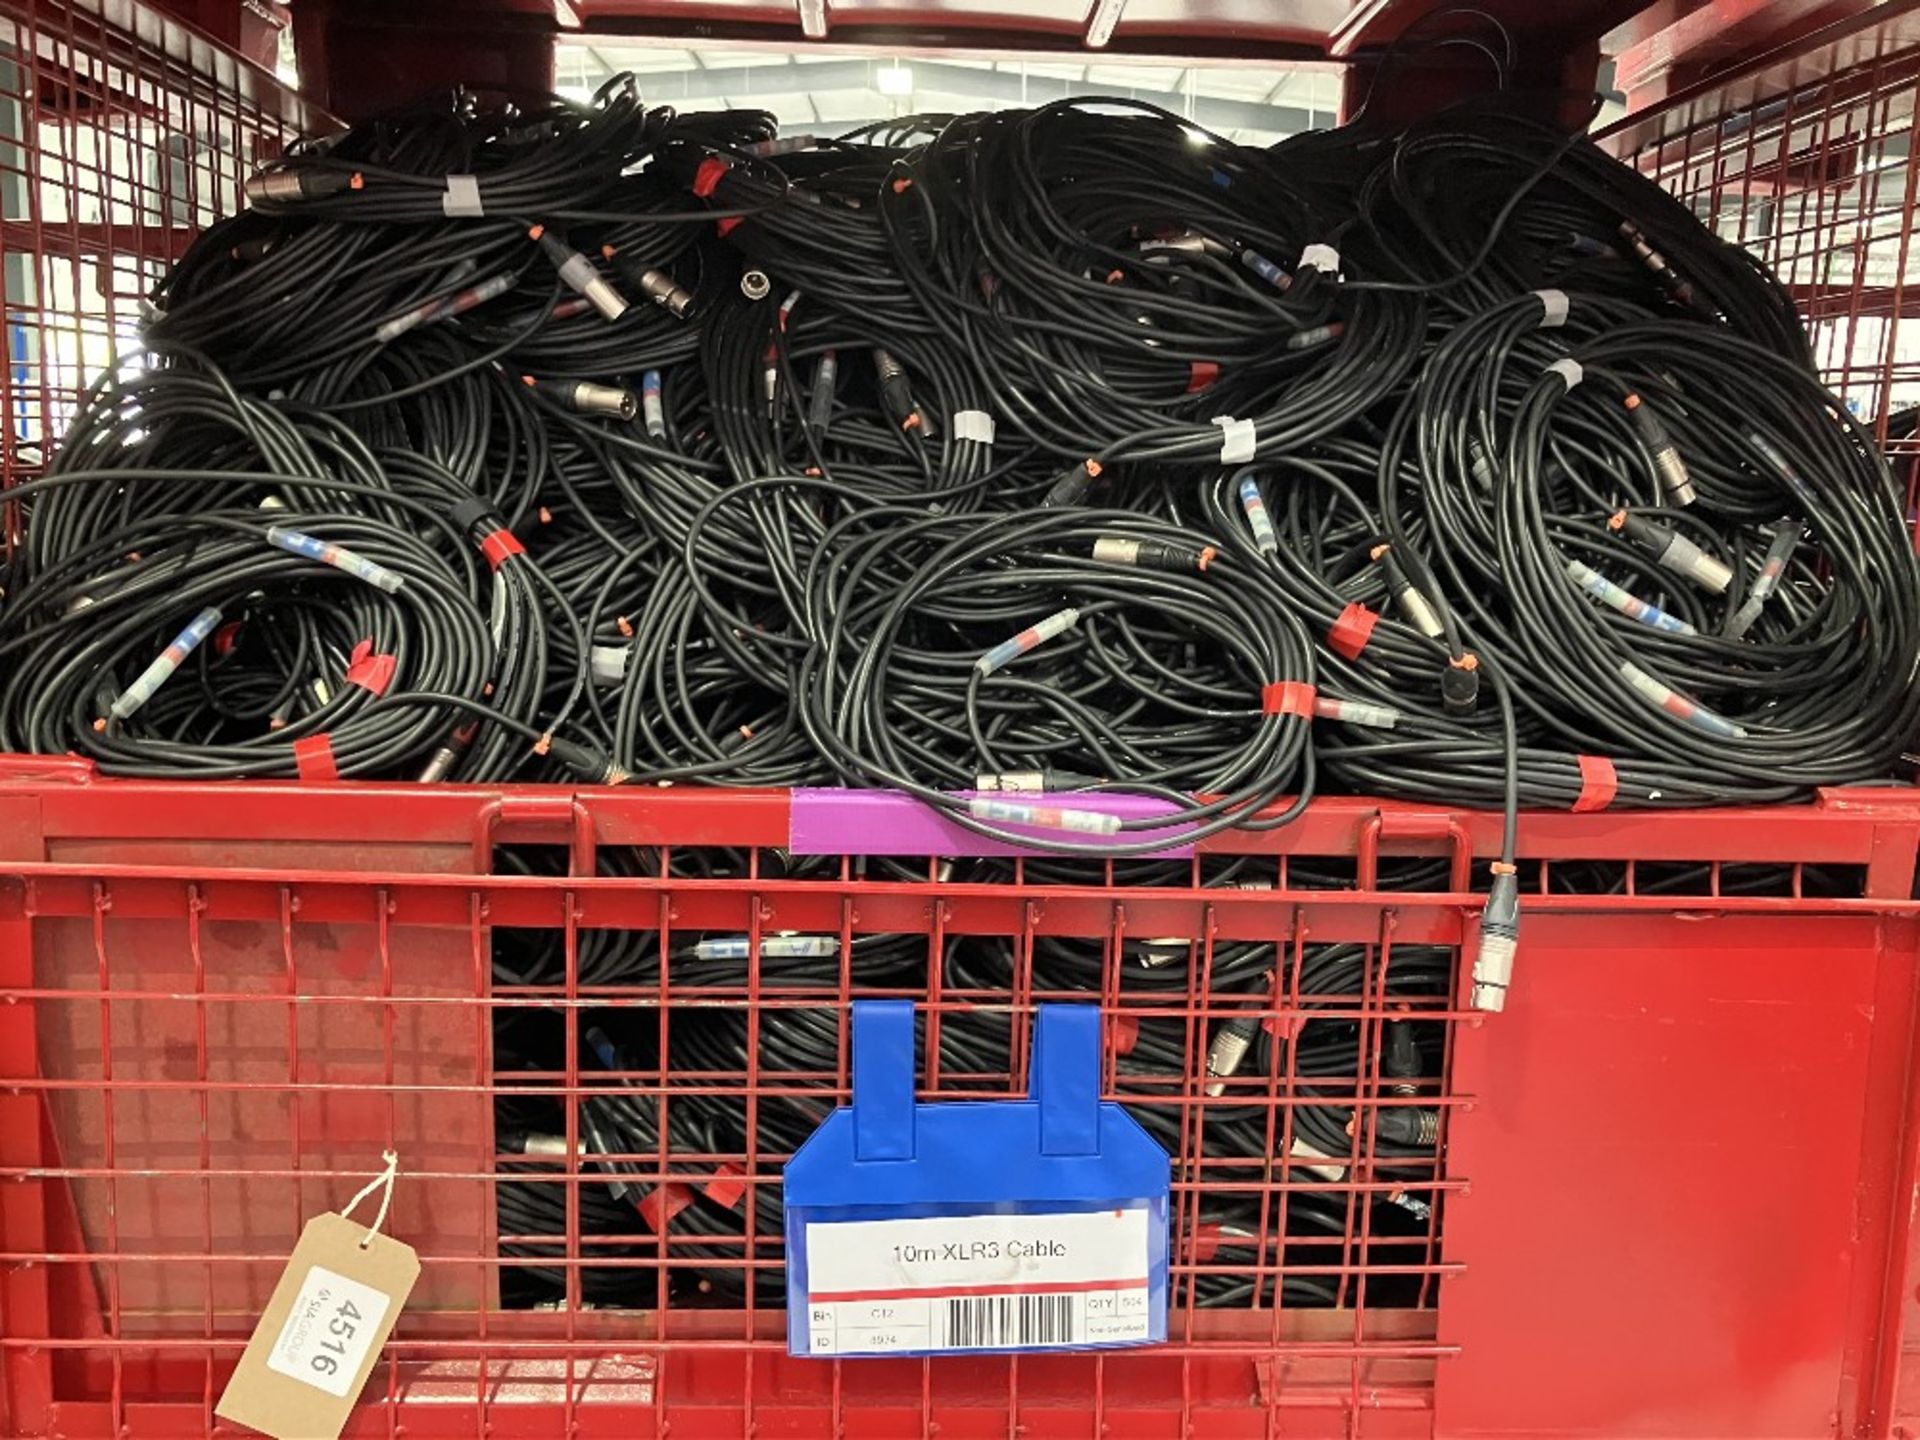 Large Quantity of 10m XLR3 Cable with Steel Fabricated Stillage - Image 5 of 5